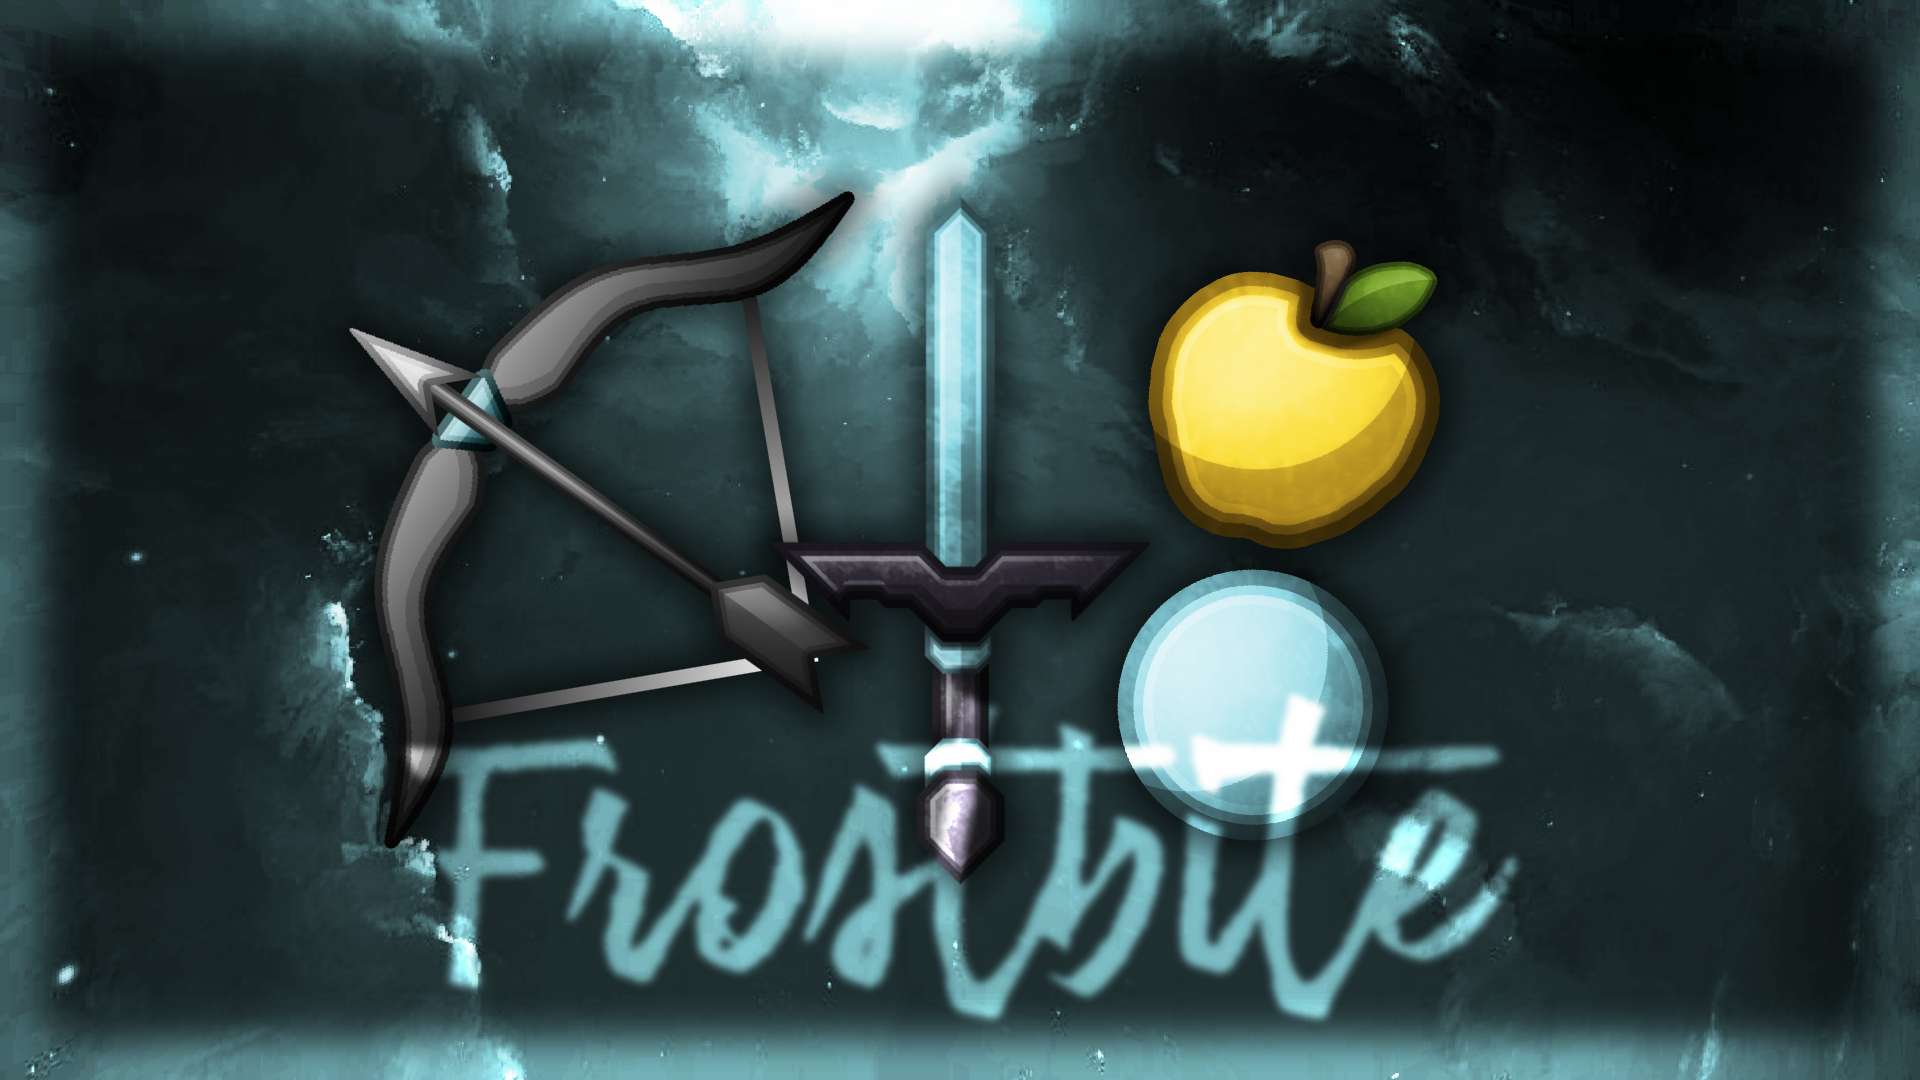 Frostbite (collab w/ Syno) 512 by Zlax on PvPRP